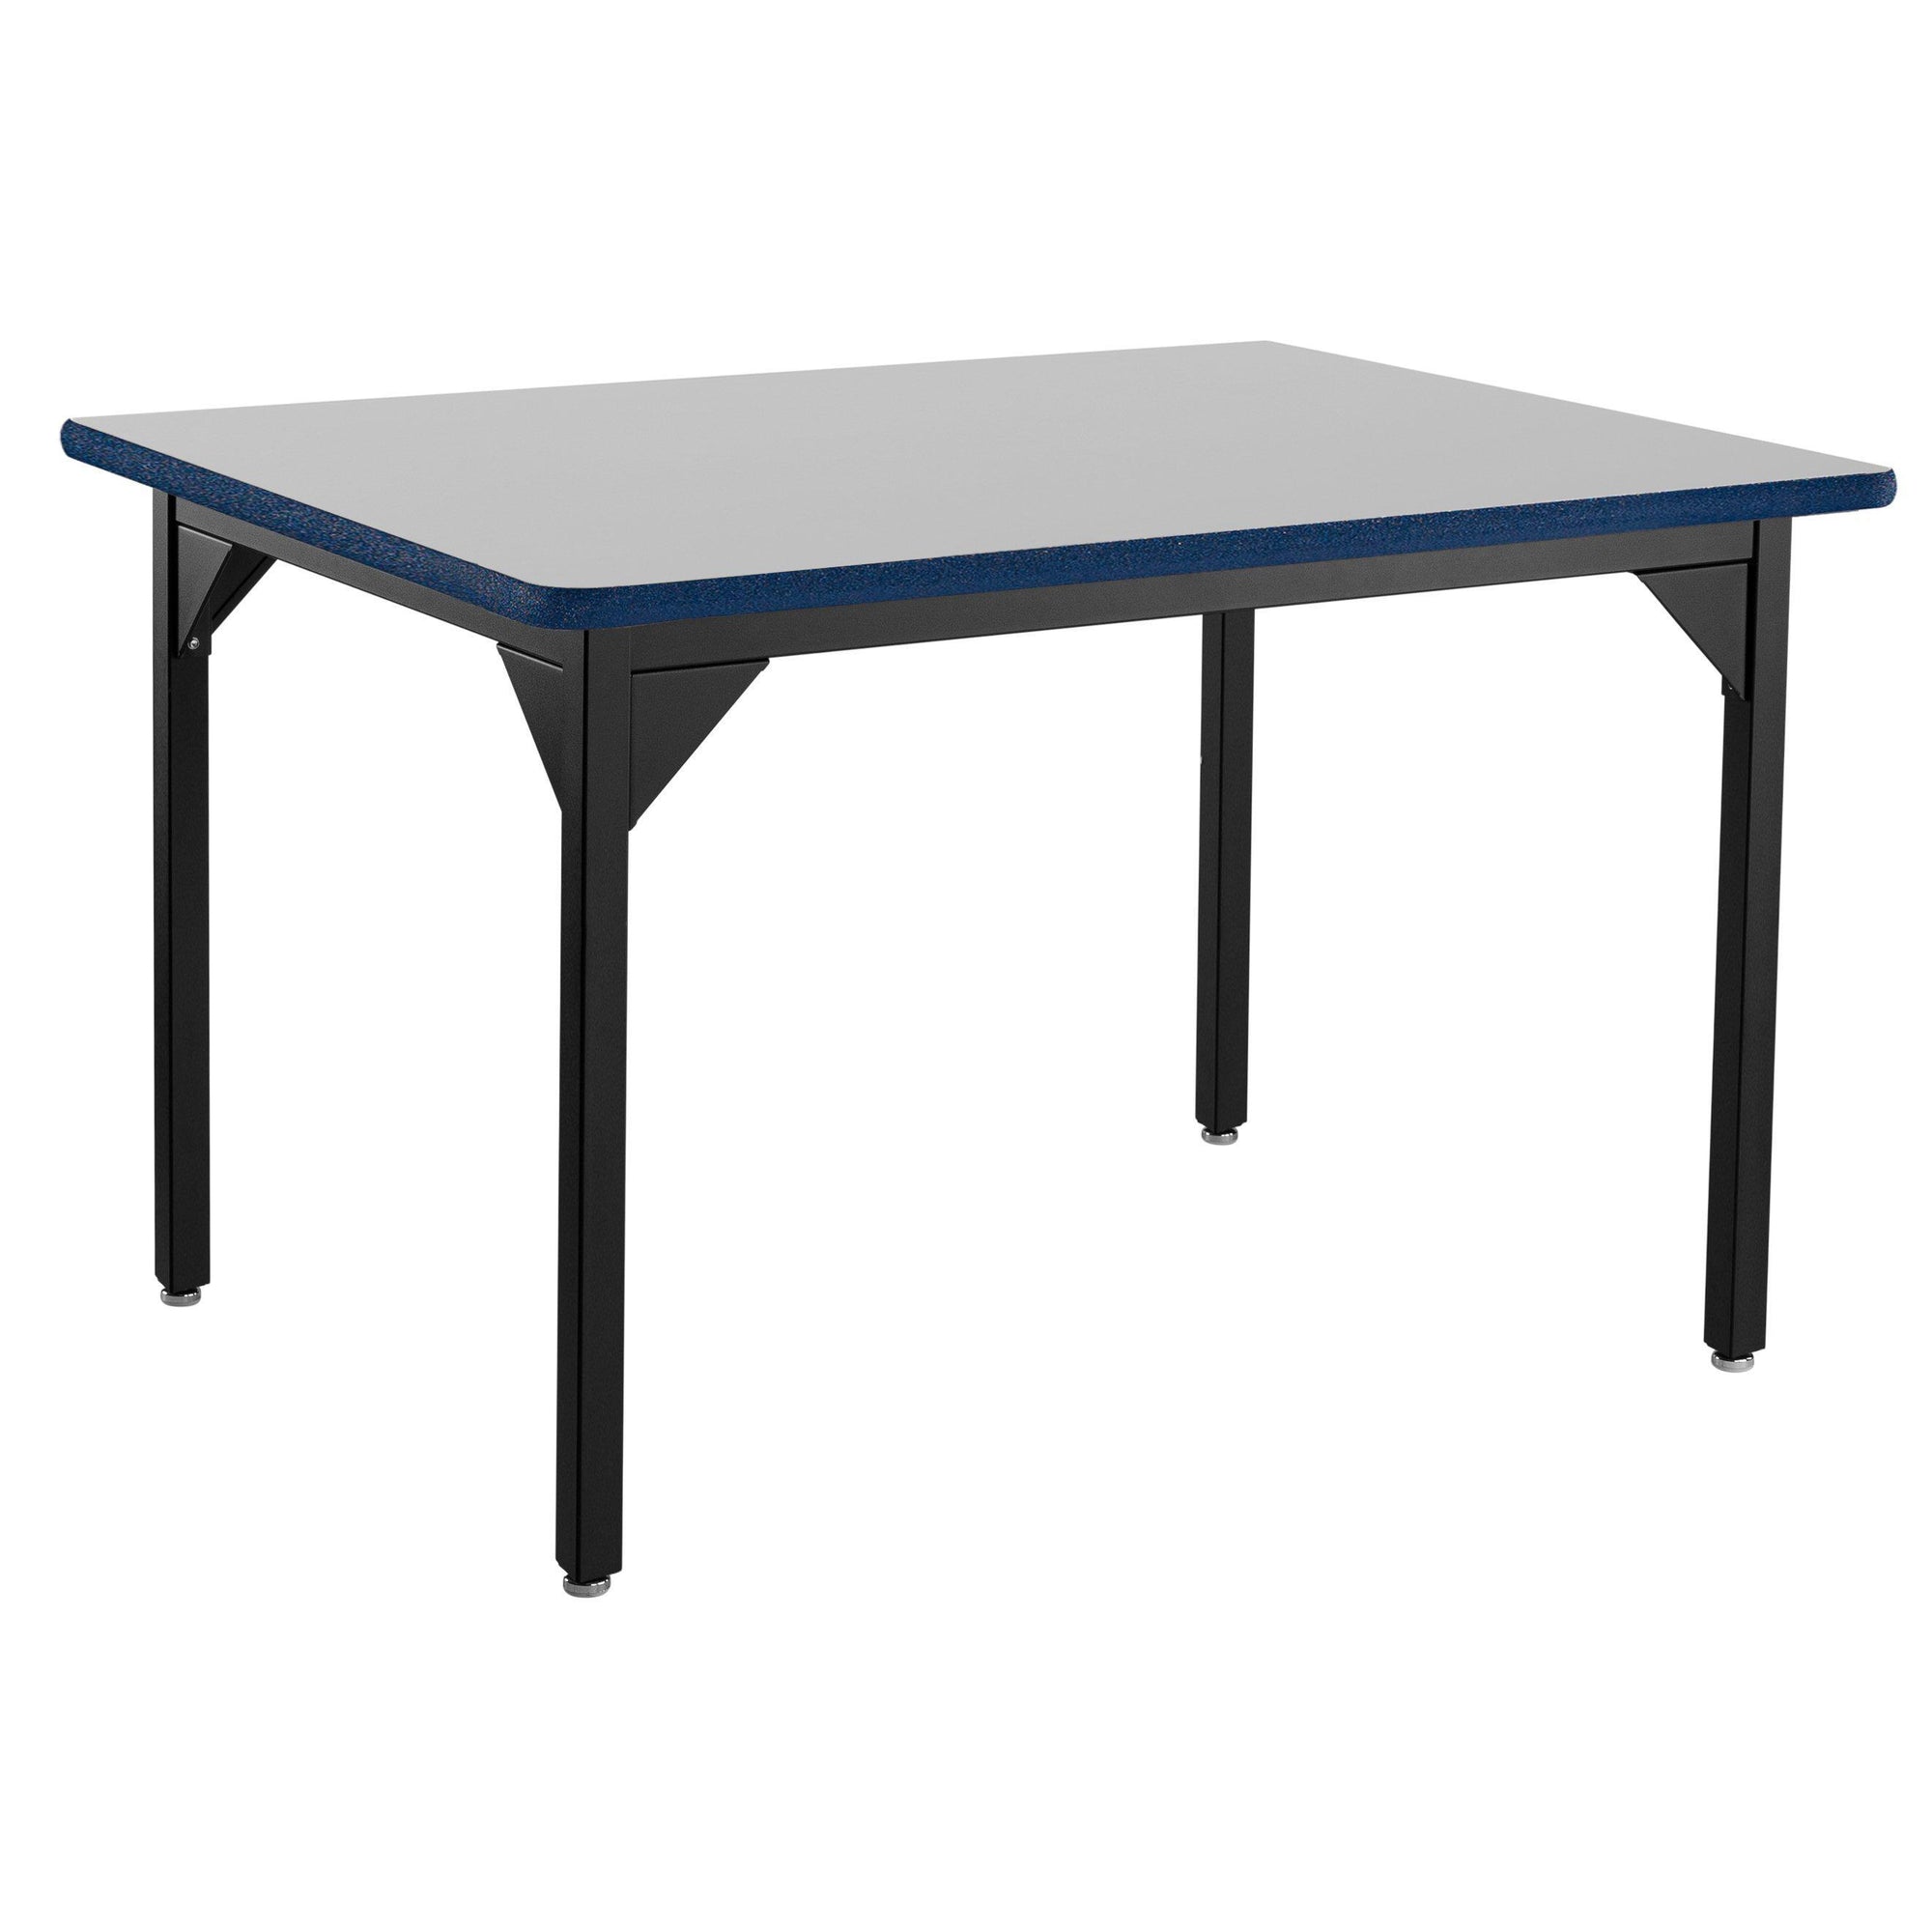 Heavy-Duty Fixed Height Utility Table, Black Frame, 36" x 42", Supreme High-Pressure Laminate Top with Black ProtectEdge